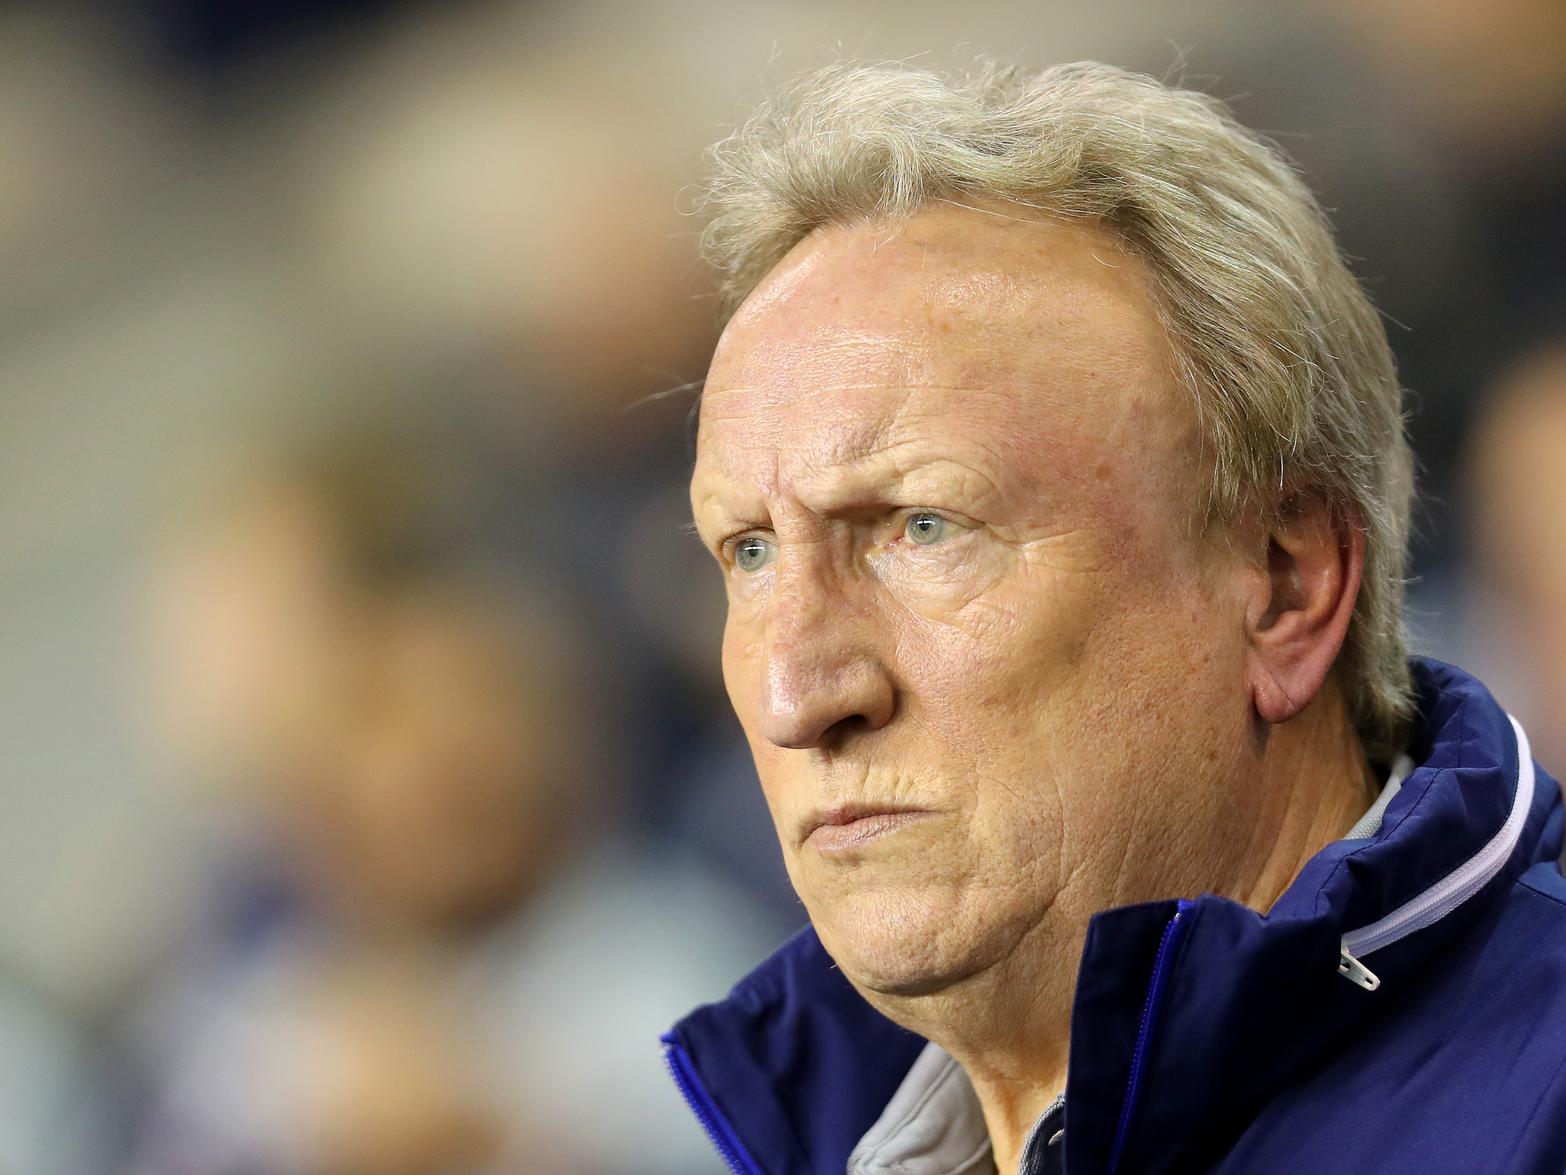 Cardiff City boss Neil Warnock aimed a dig at Swansea City fans following his side's 1-0 loss to their Welsh rivals on Sunday, claiming that their supporters created a subdued atmosphere for the derby clash. (Wales Online)